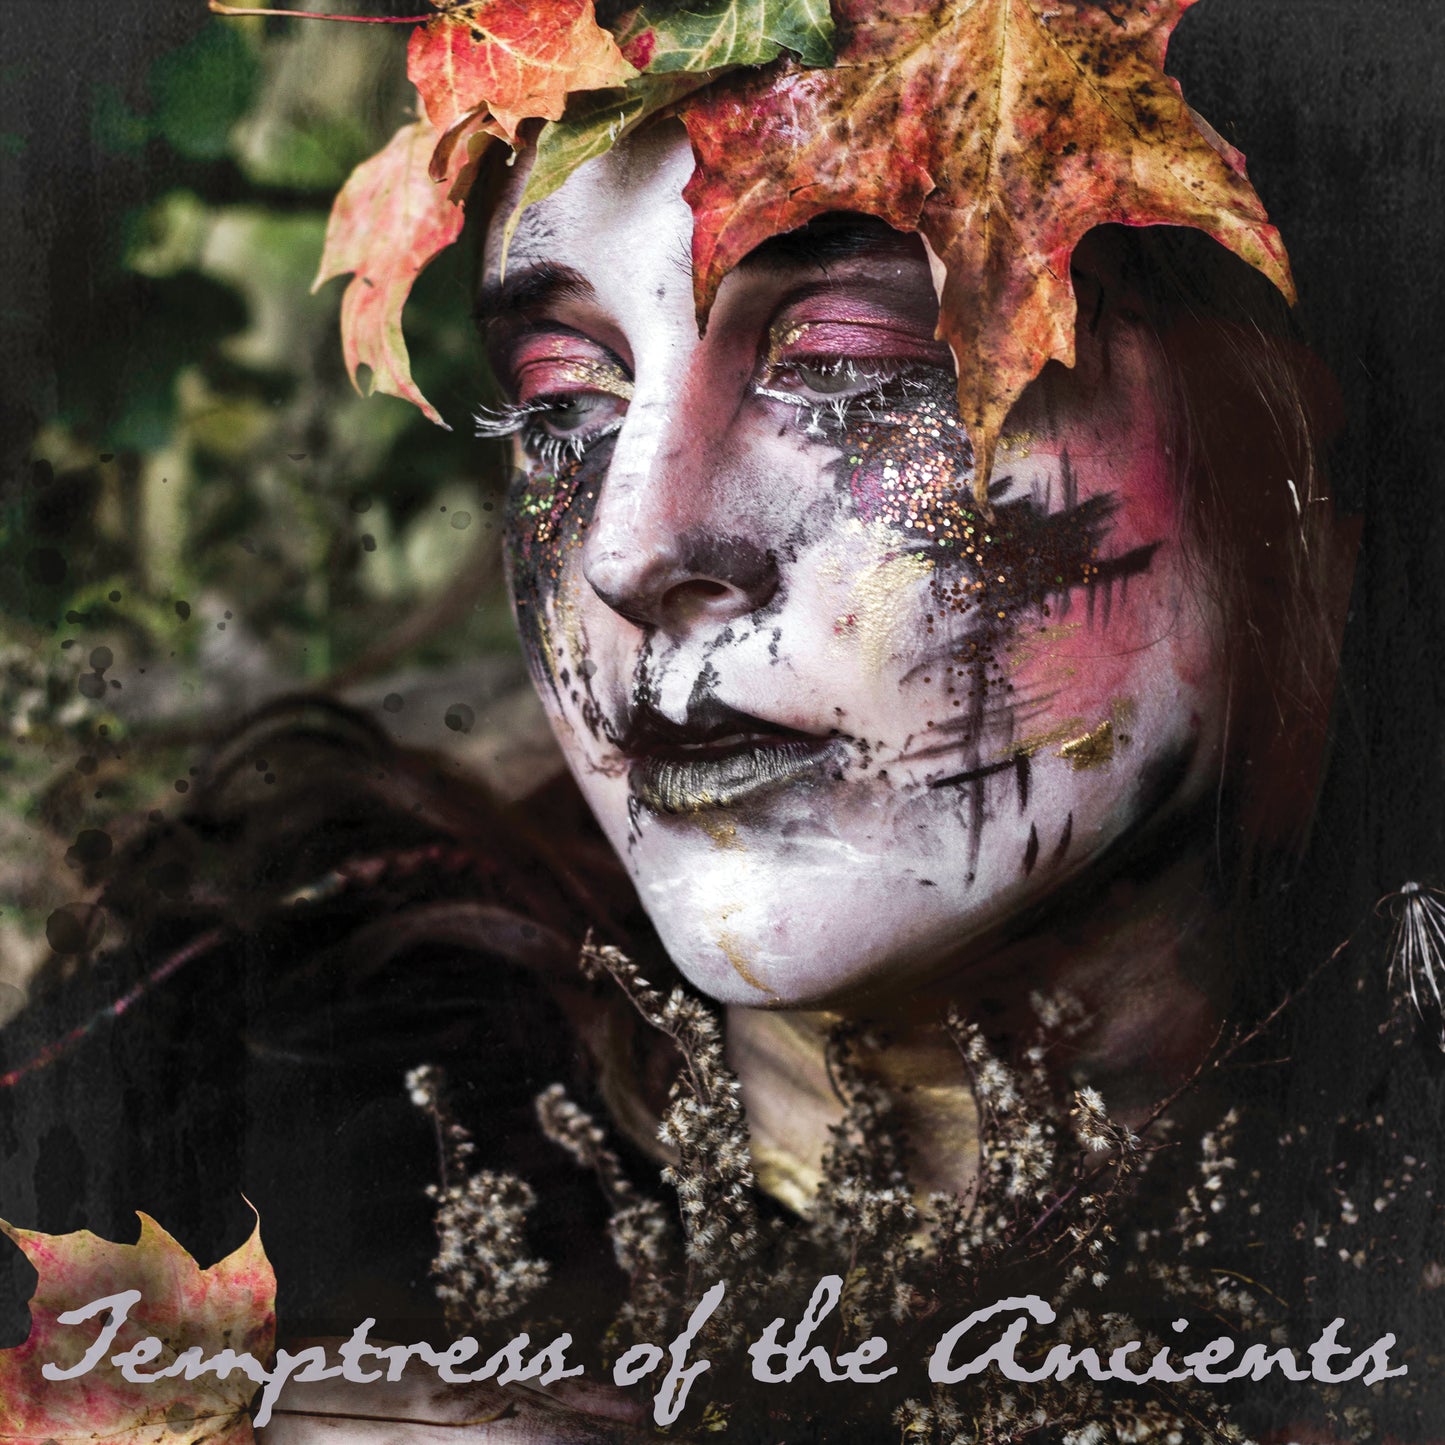 Temptress of the Ancients - Stereoplasm